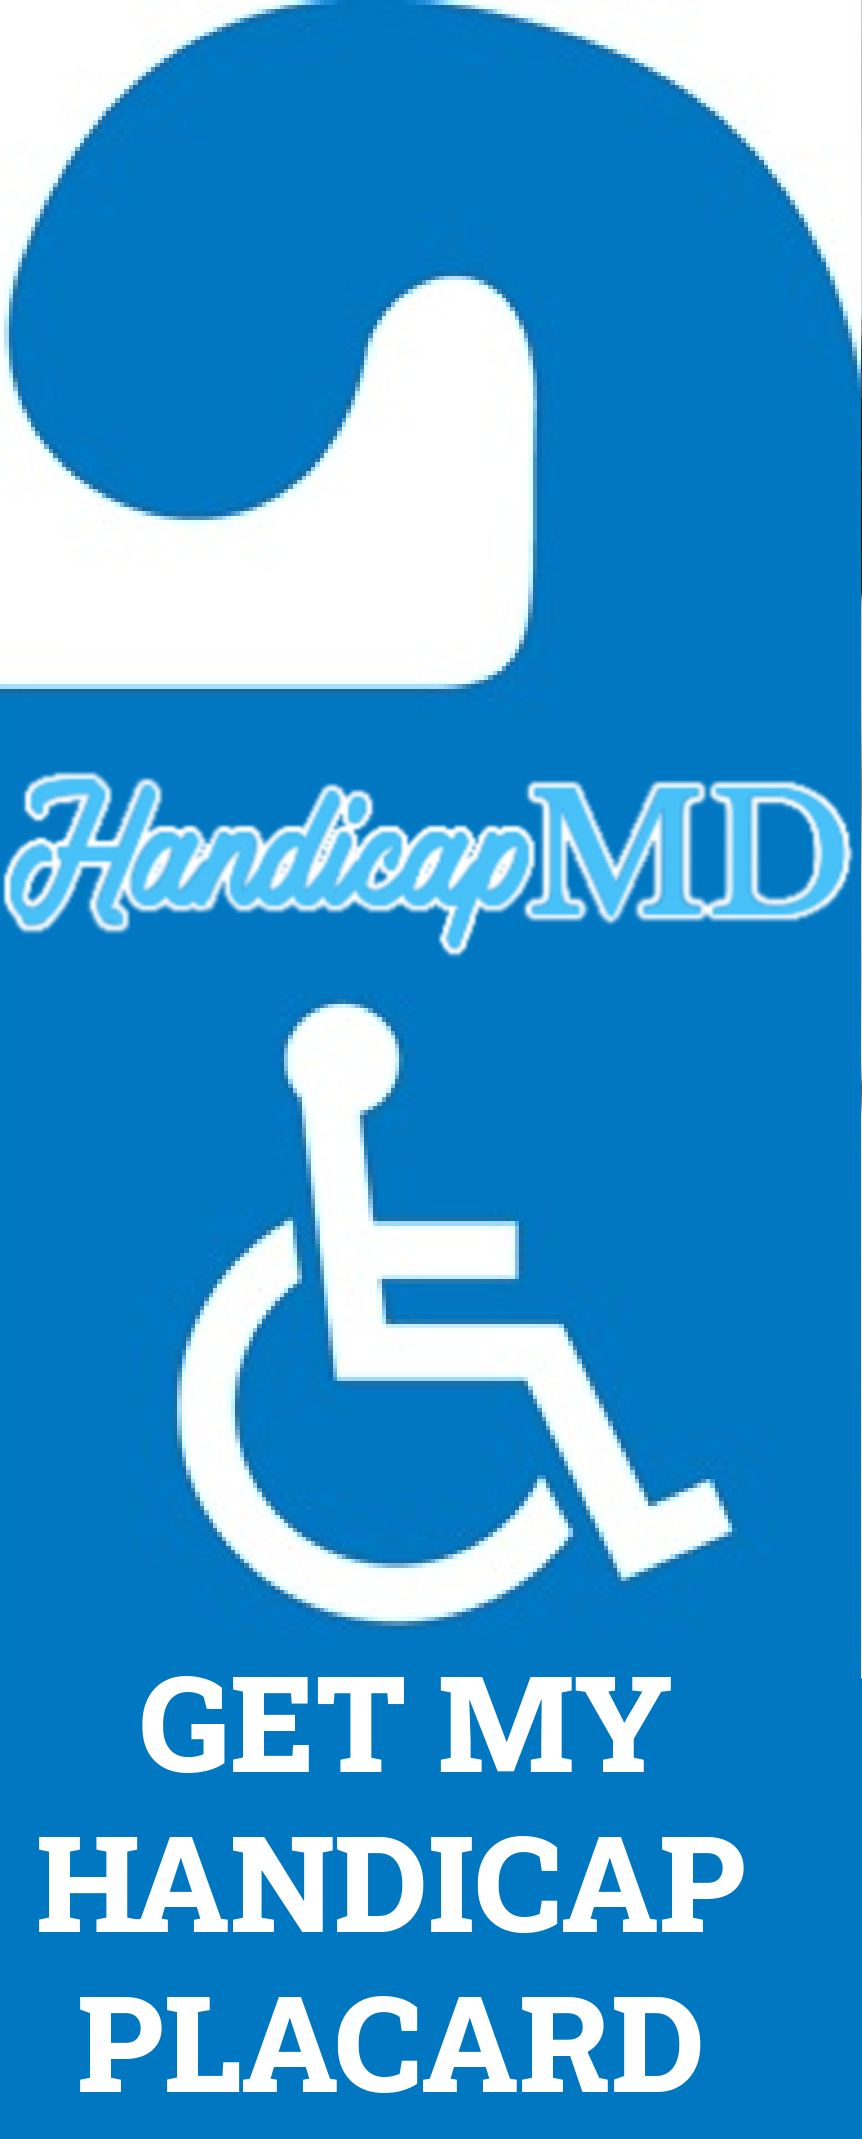 Handicap Placard Violations and Penalties in Alabama: What You Need to Know